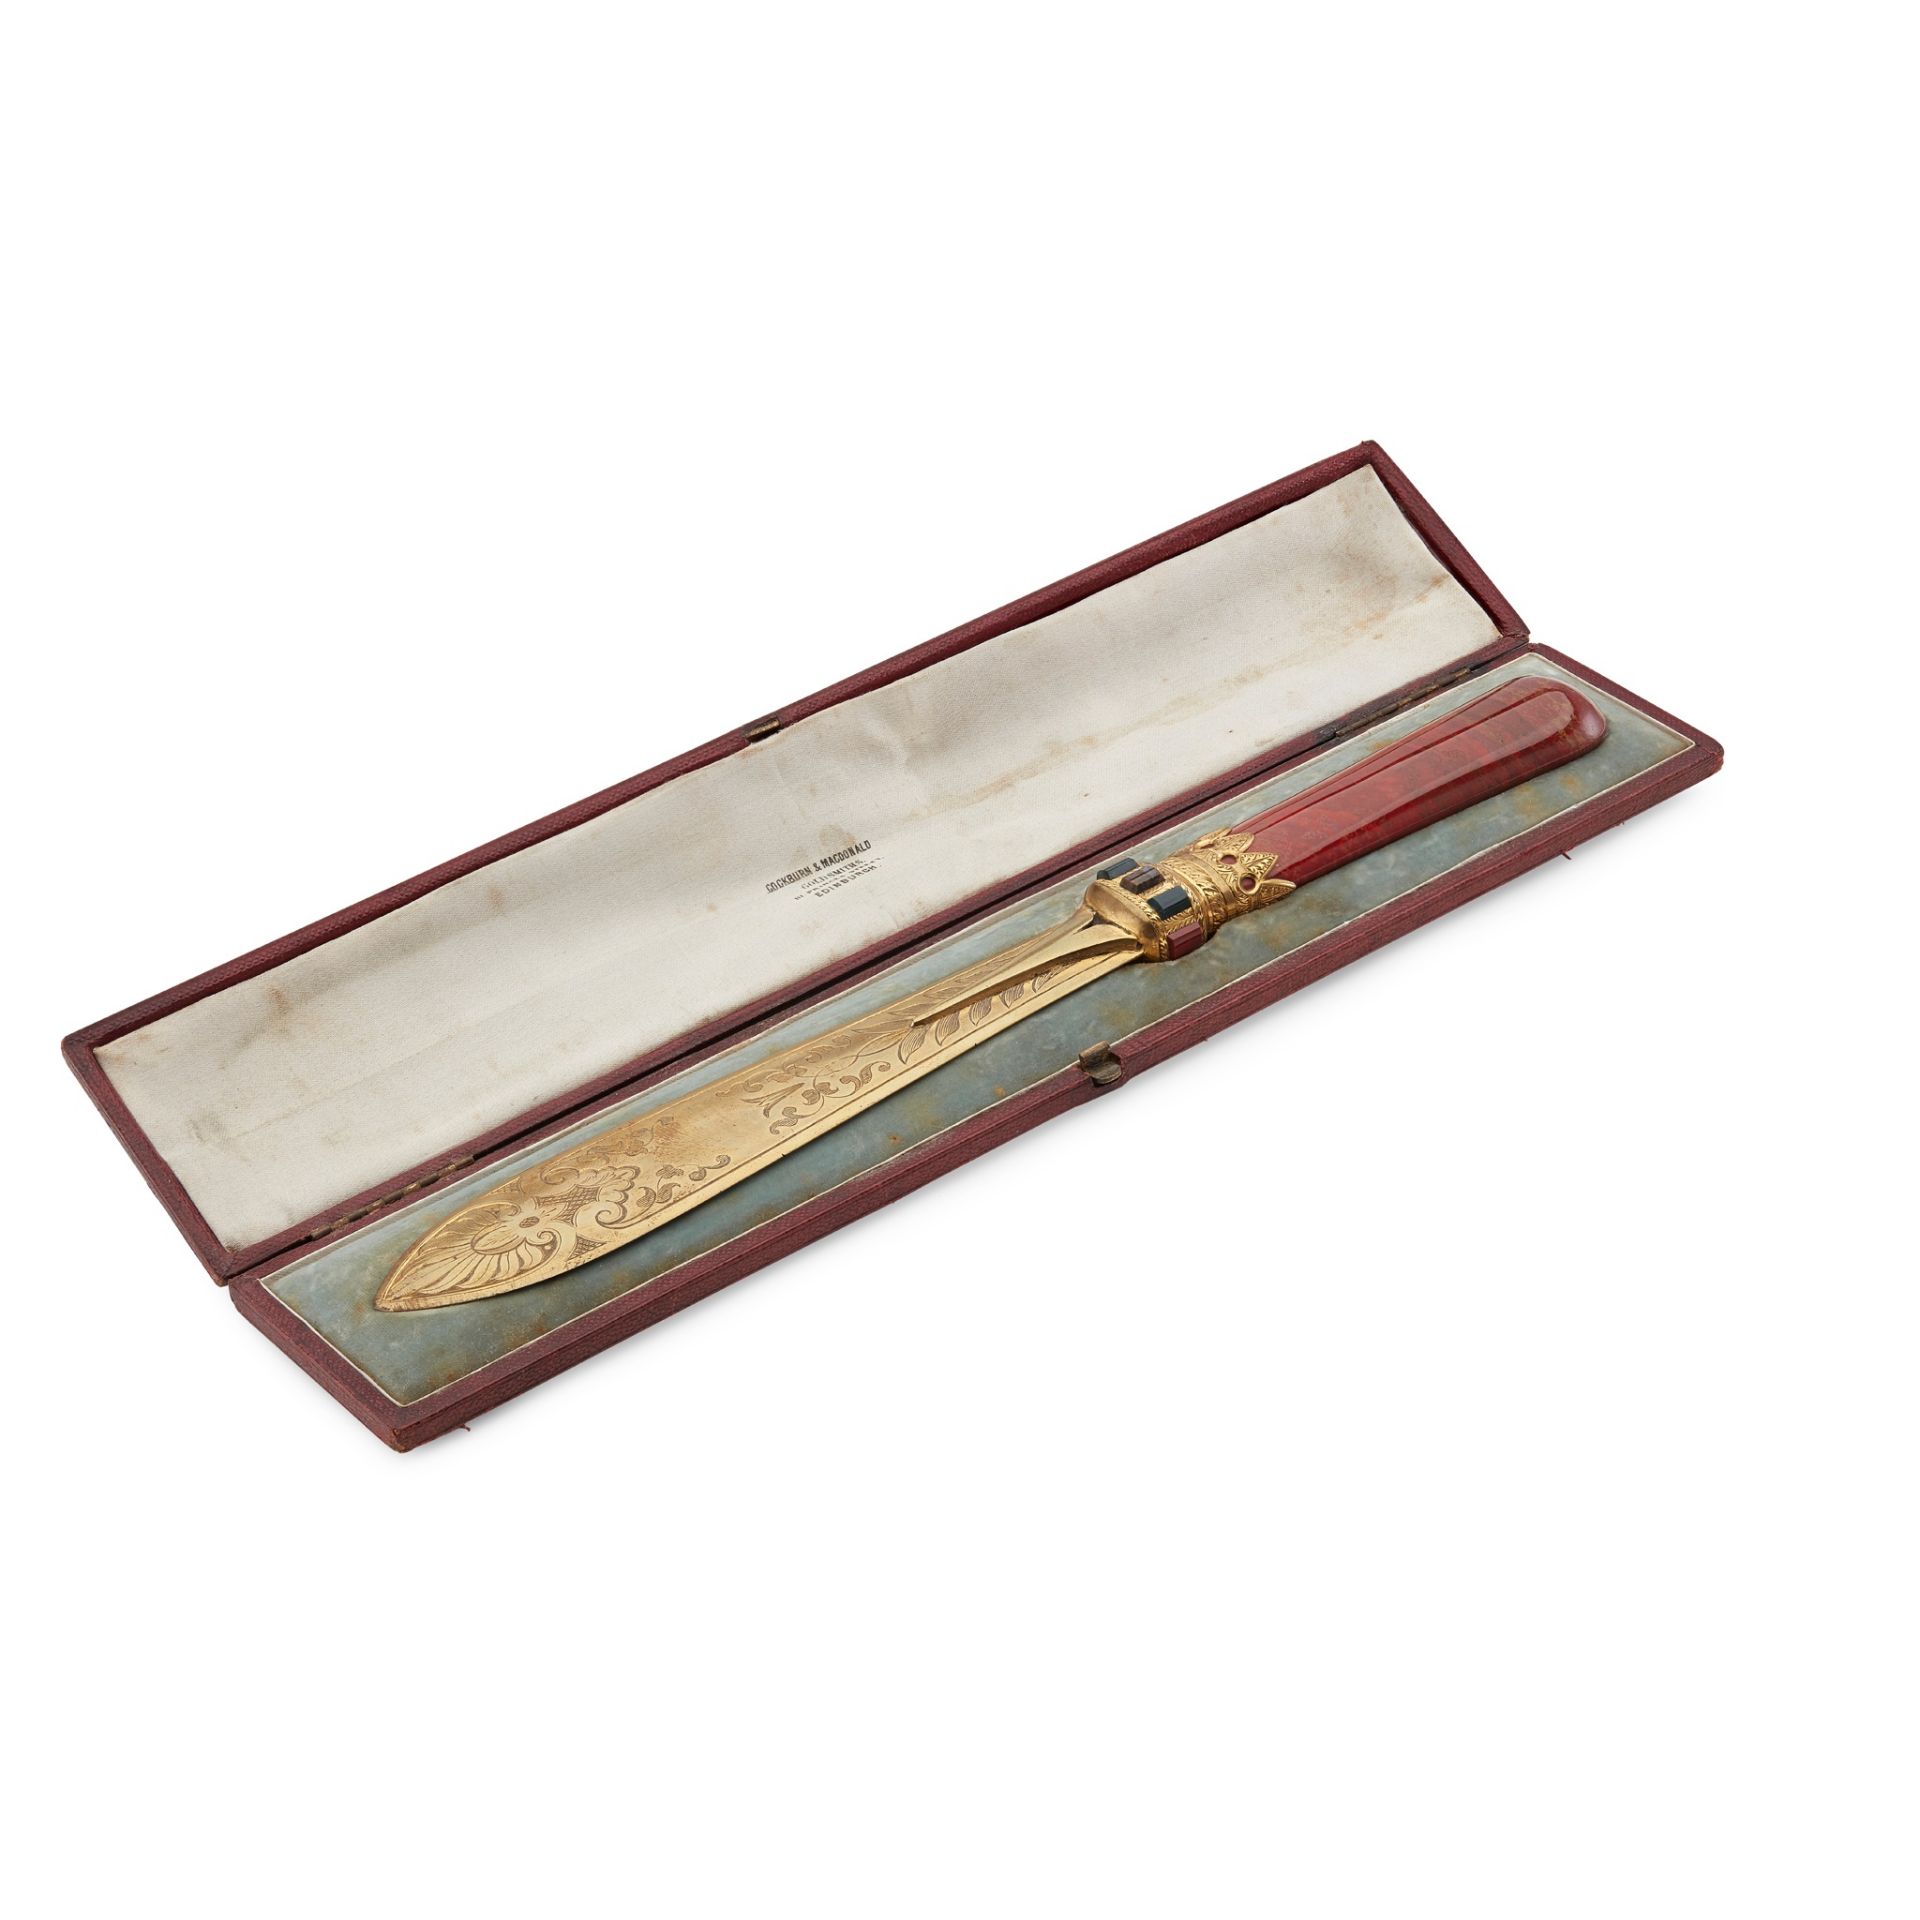 A VICTORIAN CASED GILT PAPER KNIFE RETAILED BY COCKBURN & MACDONALD